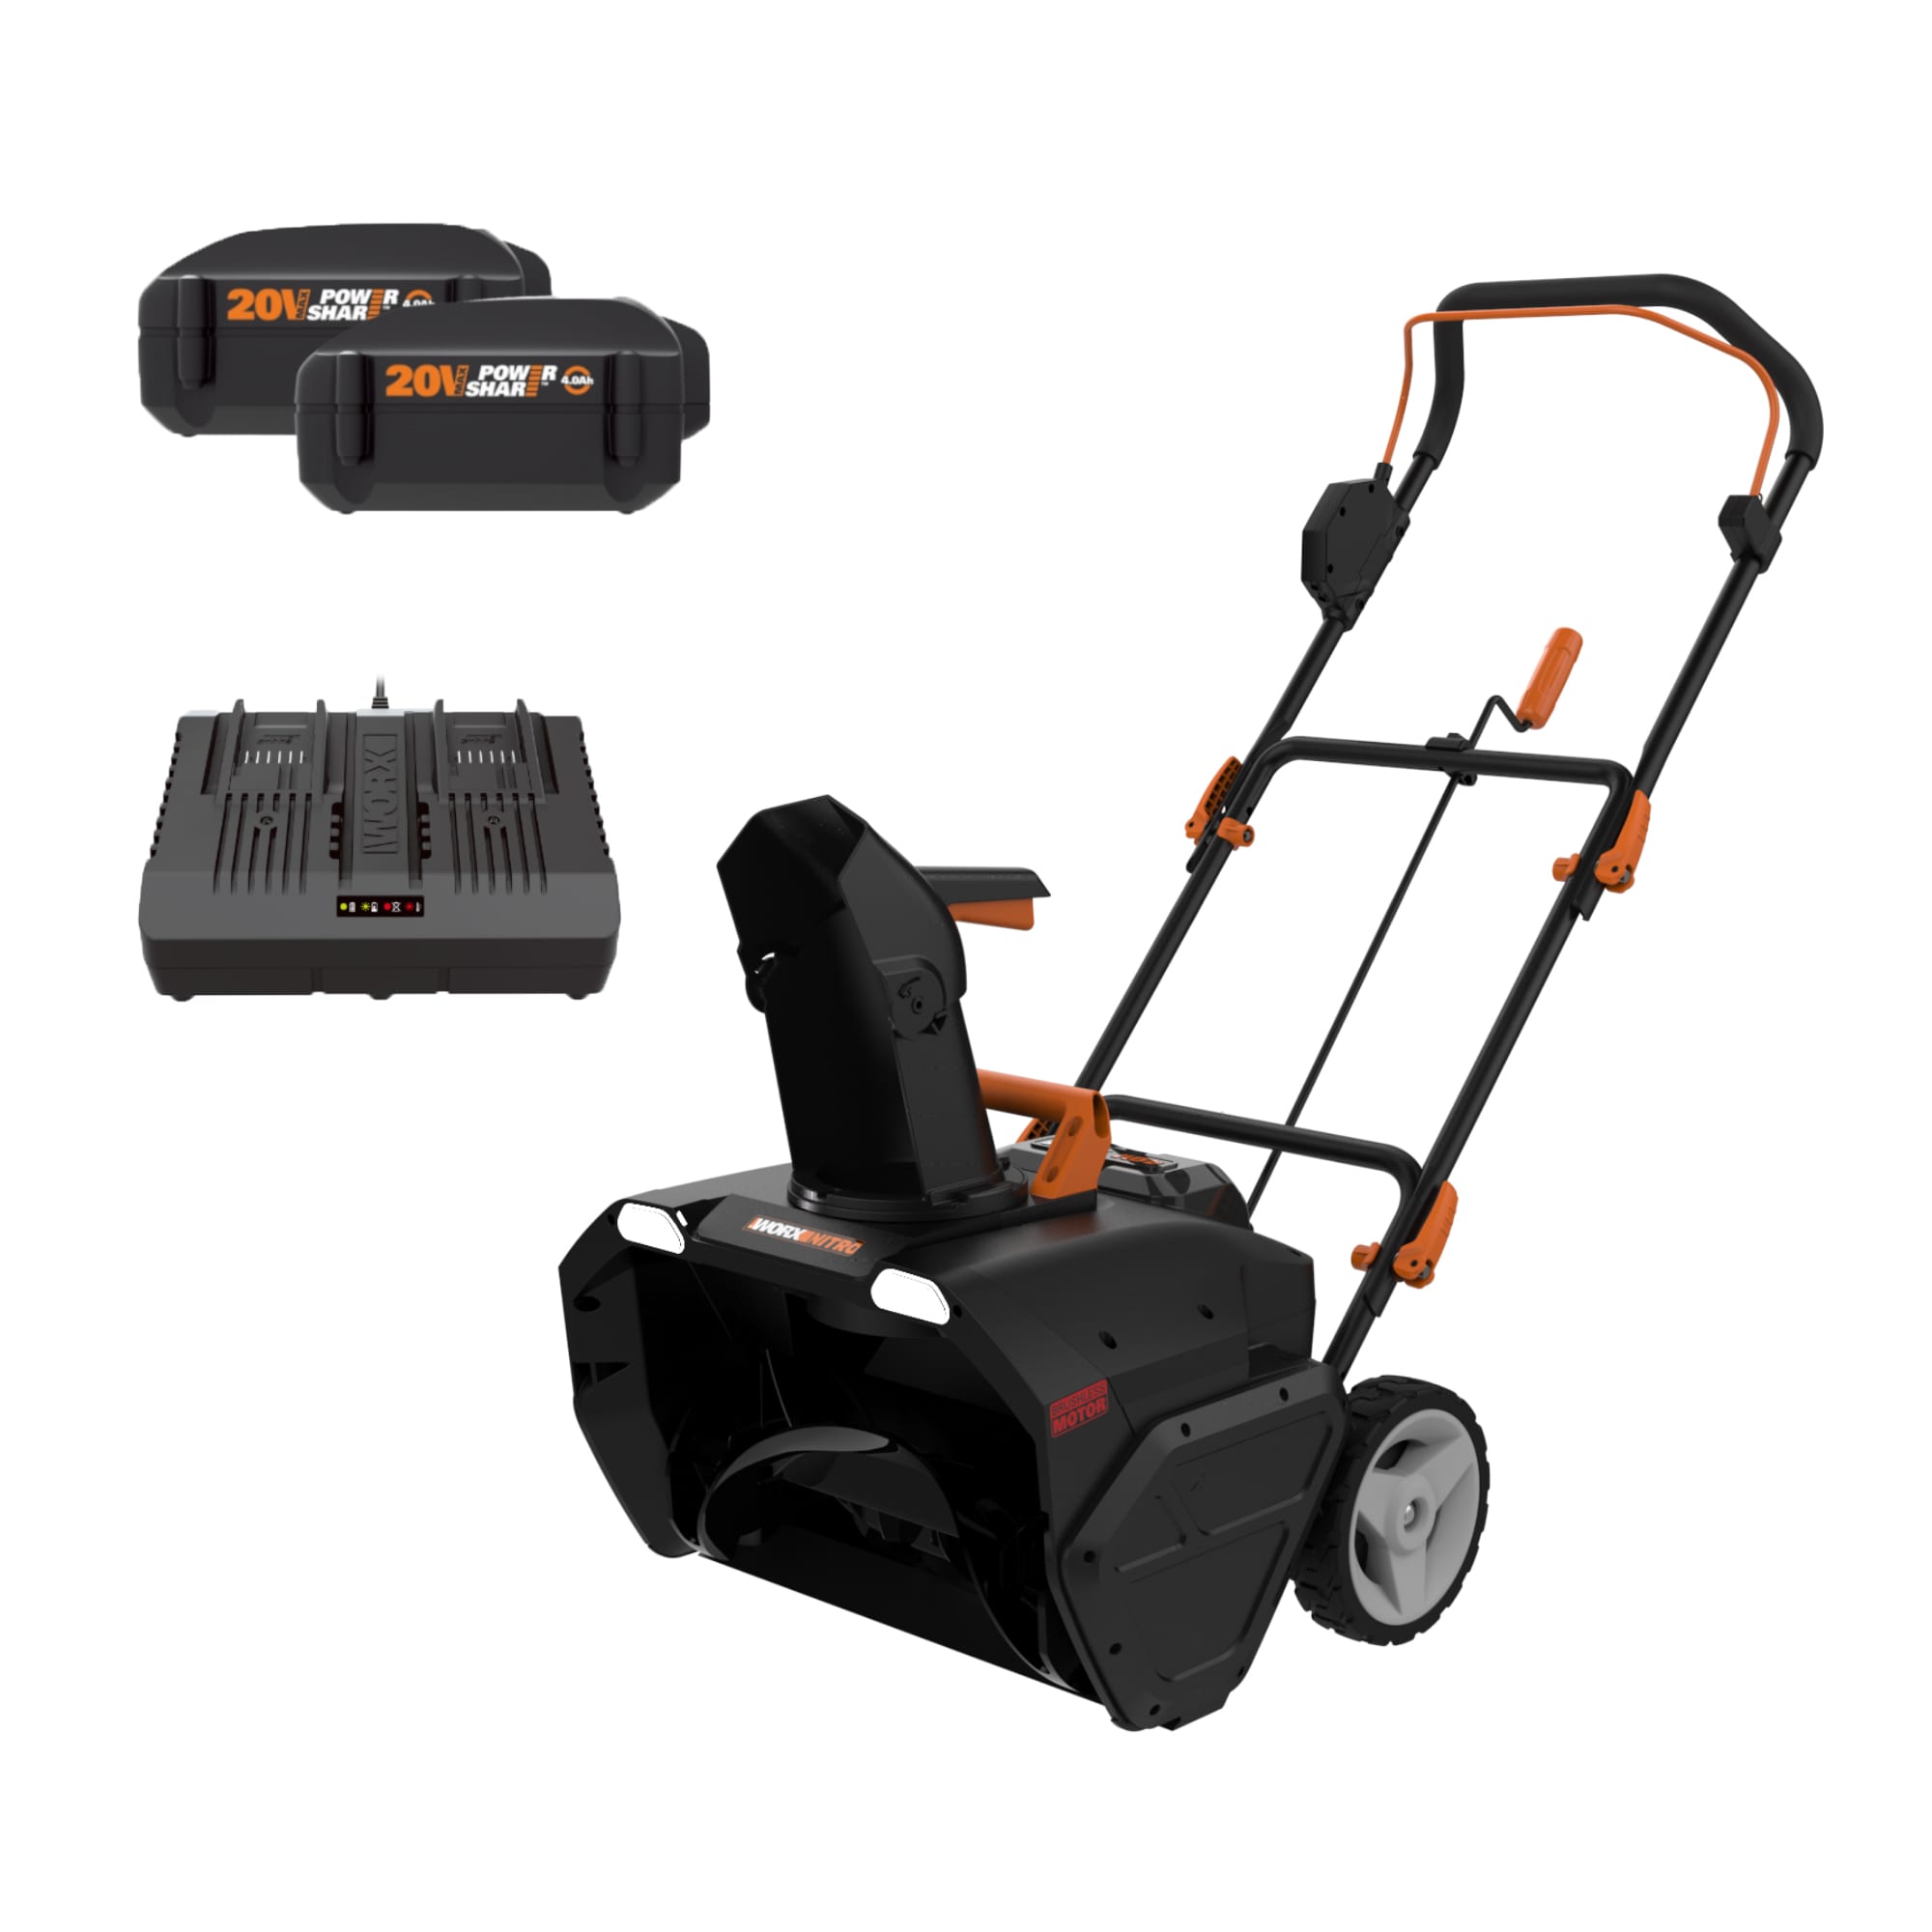 BLACK+DECKER LCSB2140 40V MAX* Brushless Lithium-Ion 21 Snow Thrower